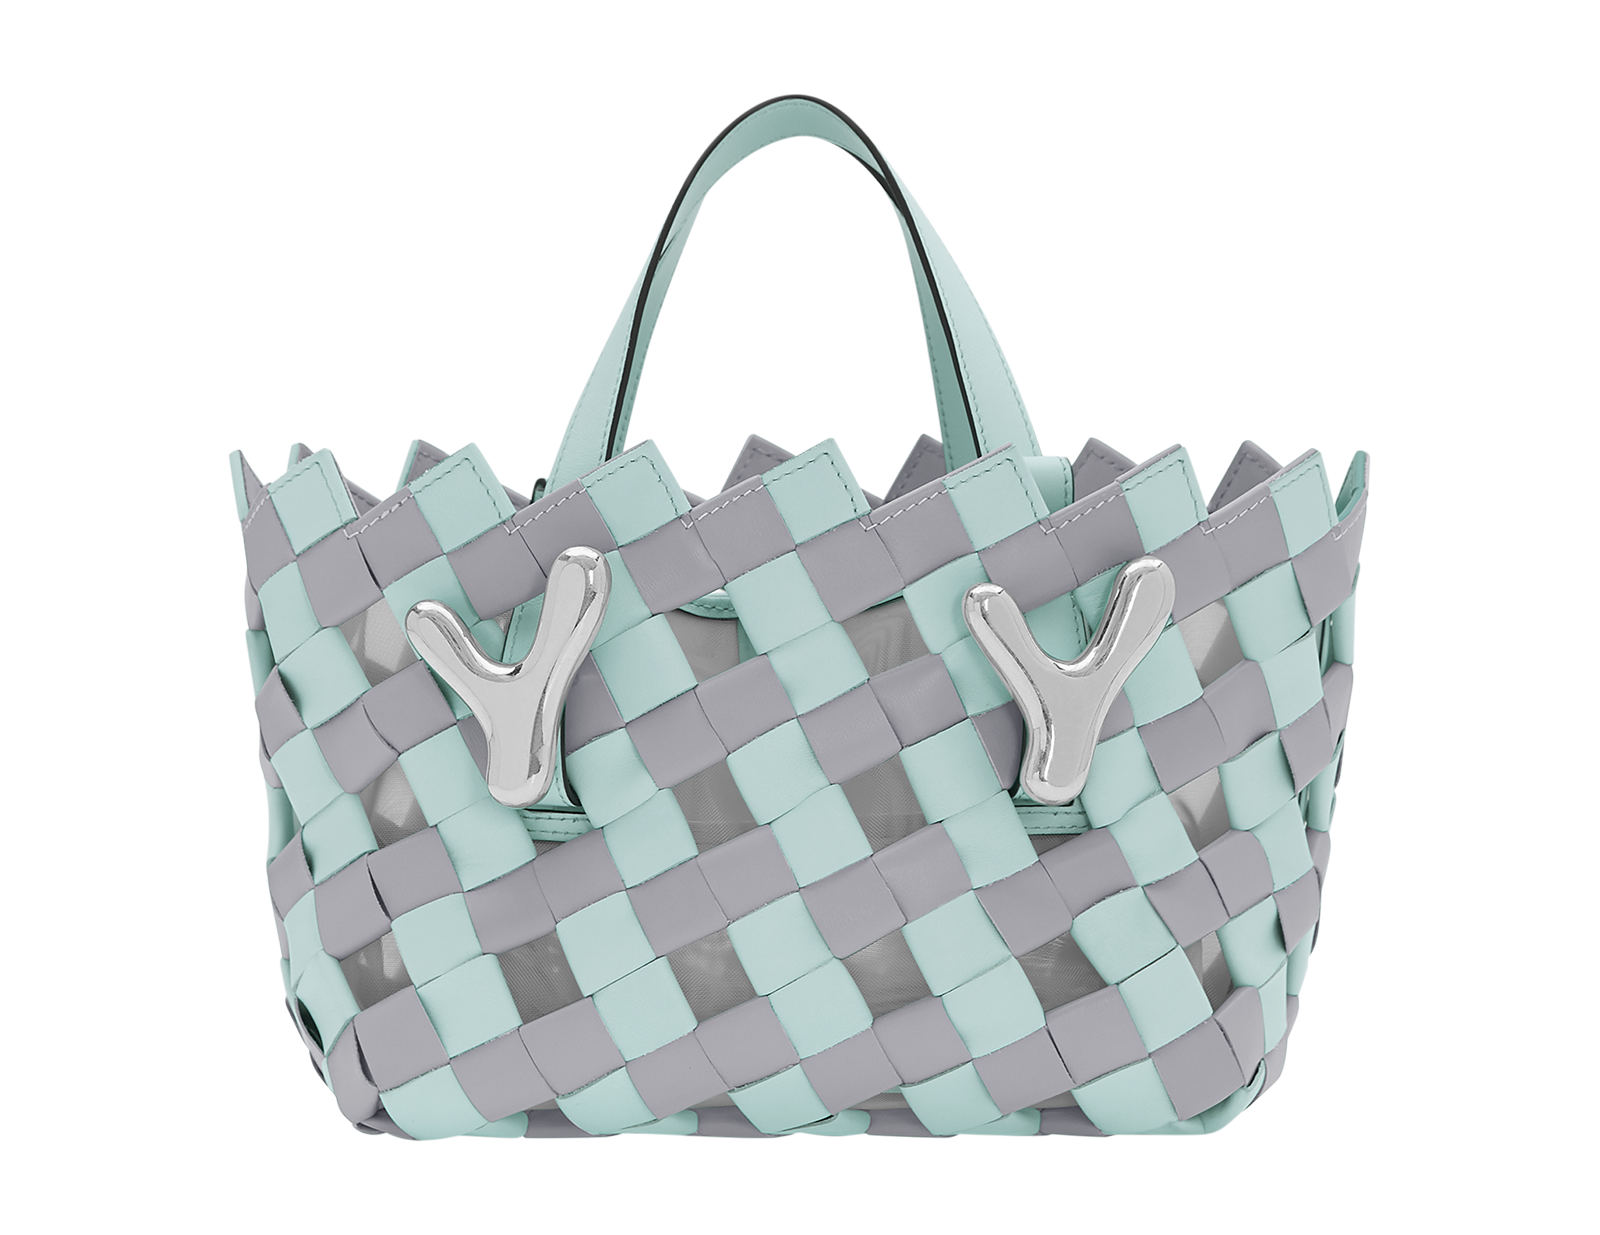 YY West 23 Woven Tote